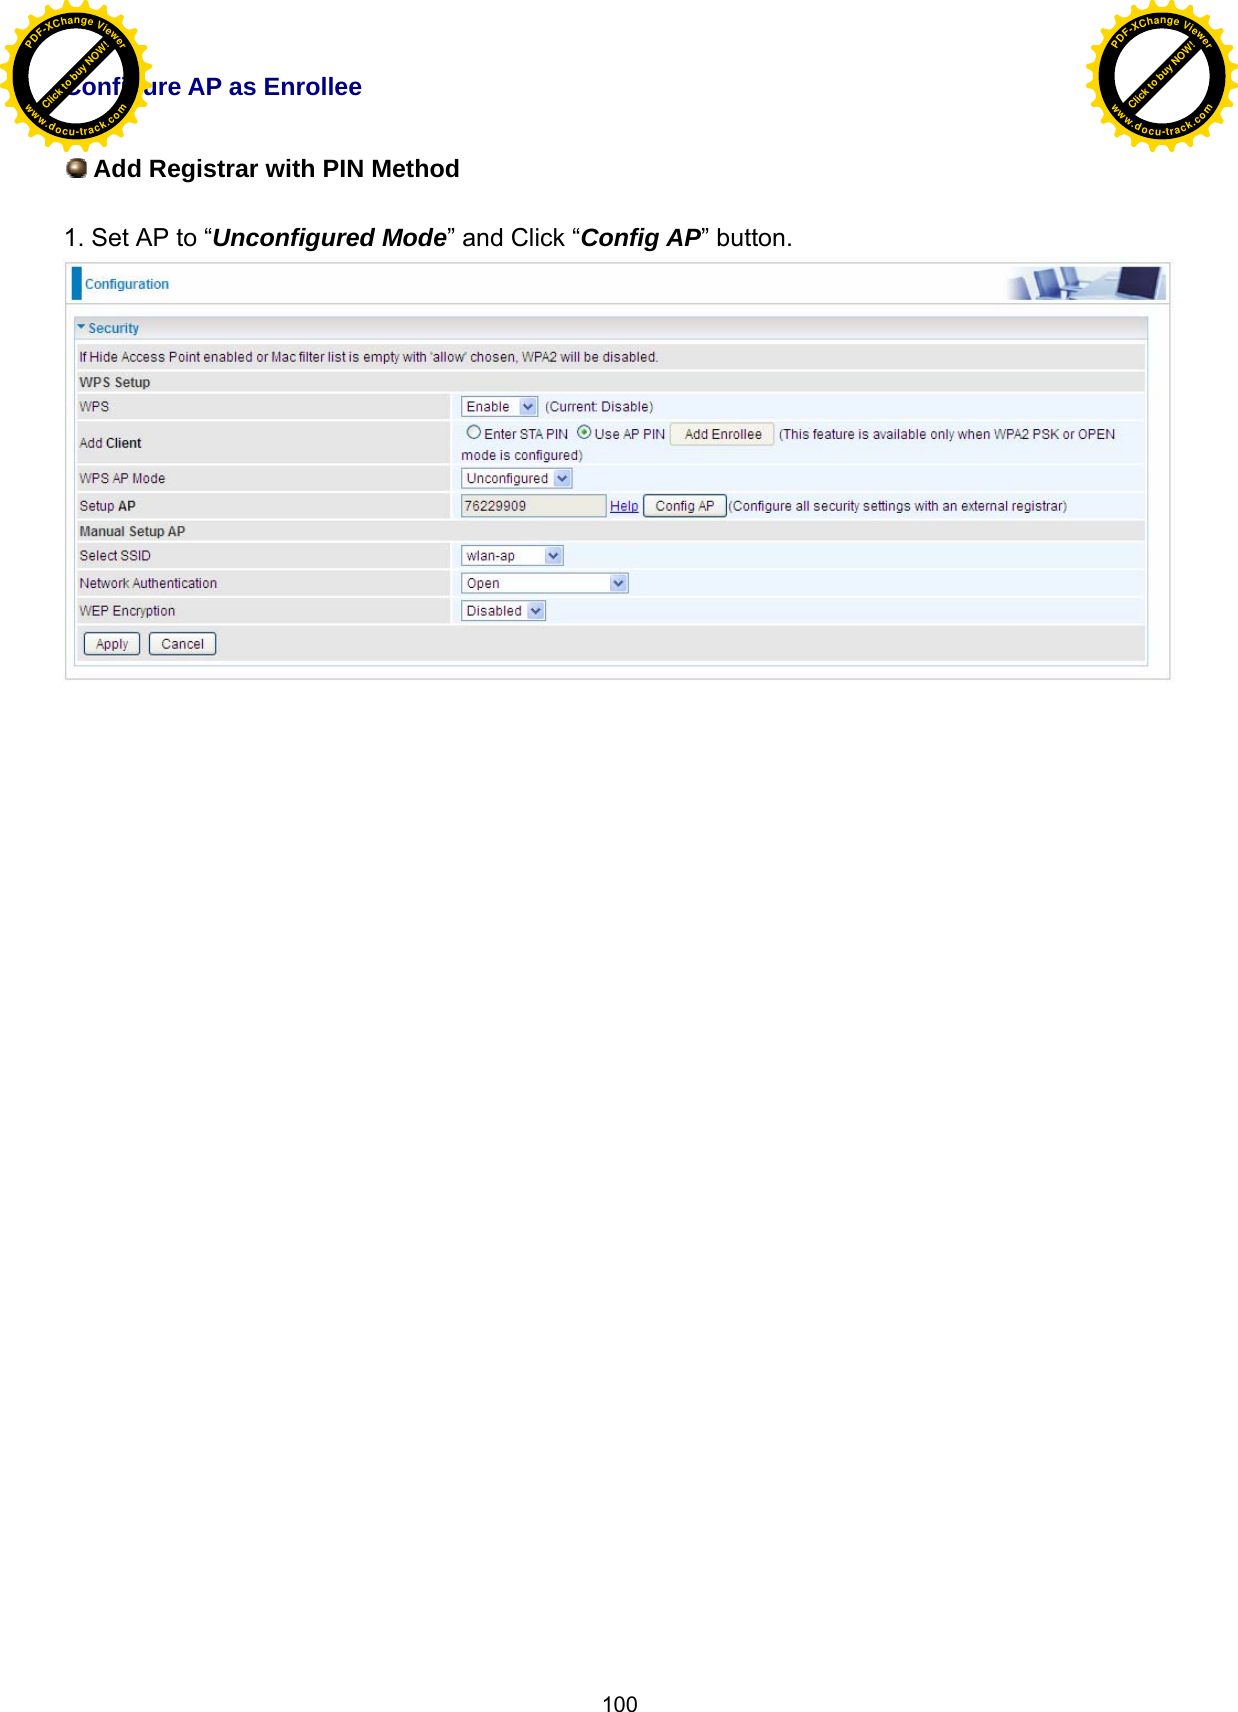  100 Configure AP as Enrollee   Add Registrar with PIN Method  1. Set AP to “Unconfigured Mode” and Click “Config AP” button.                                    Click to buy NOW!PDF-XChange Viewerwww.docu-track.comClick to buy NOW!PDF-XChange Viewerwww.docu-track.com